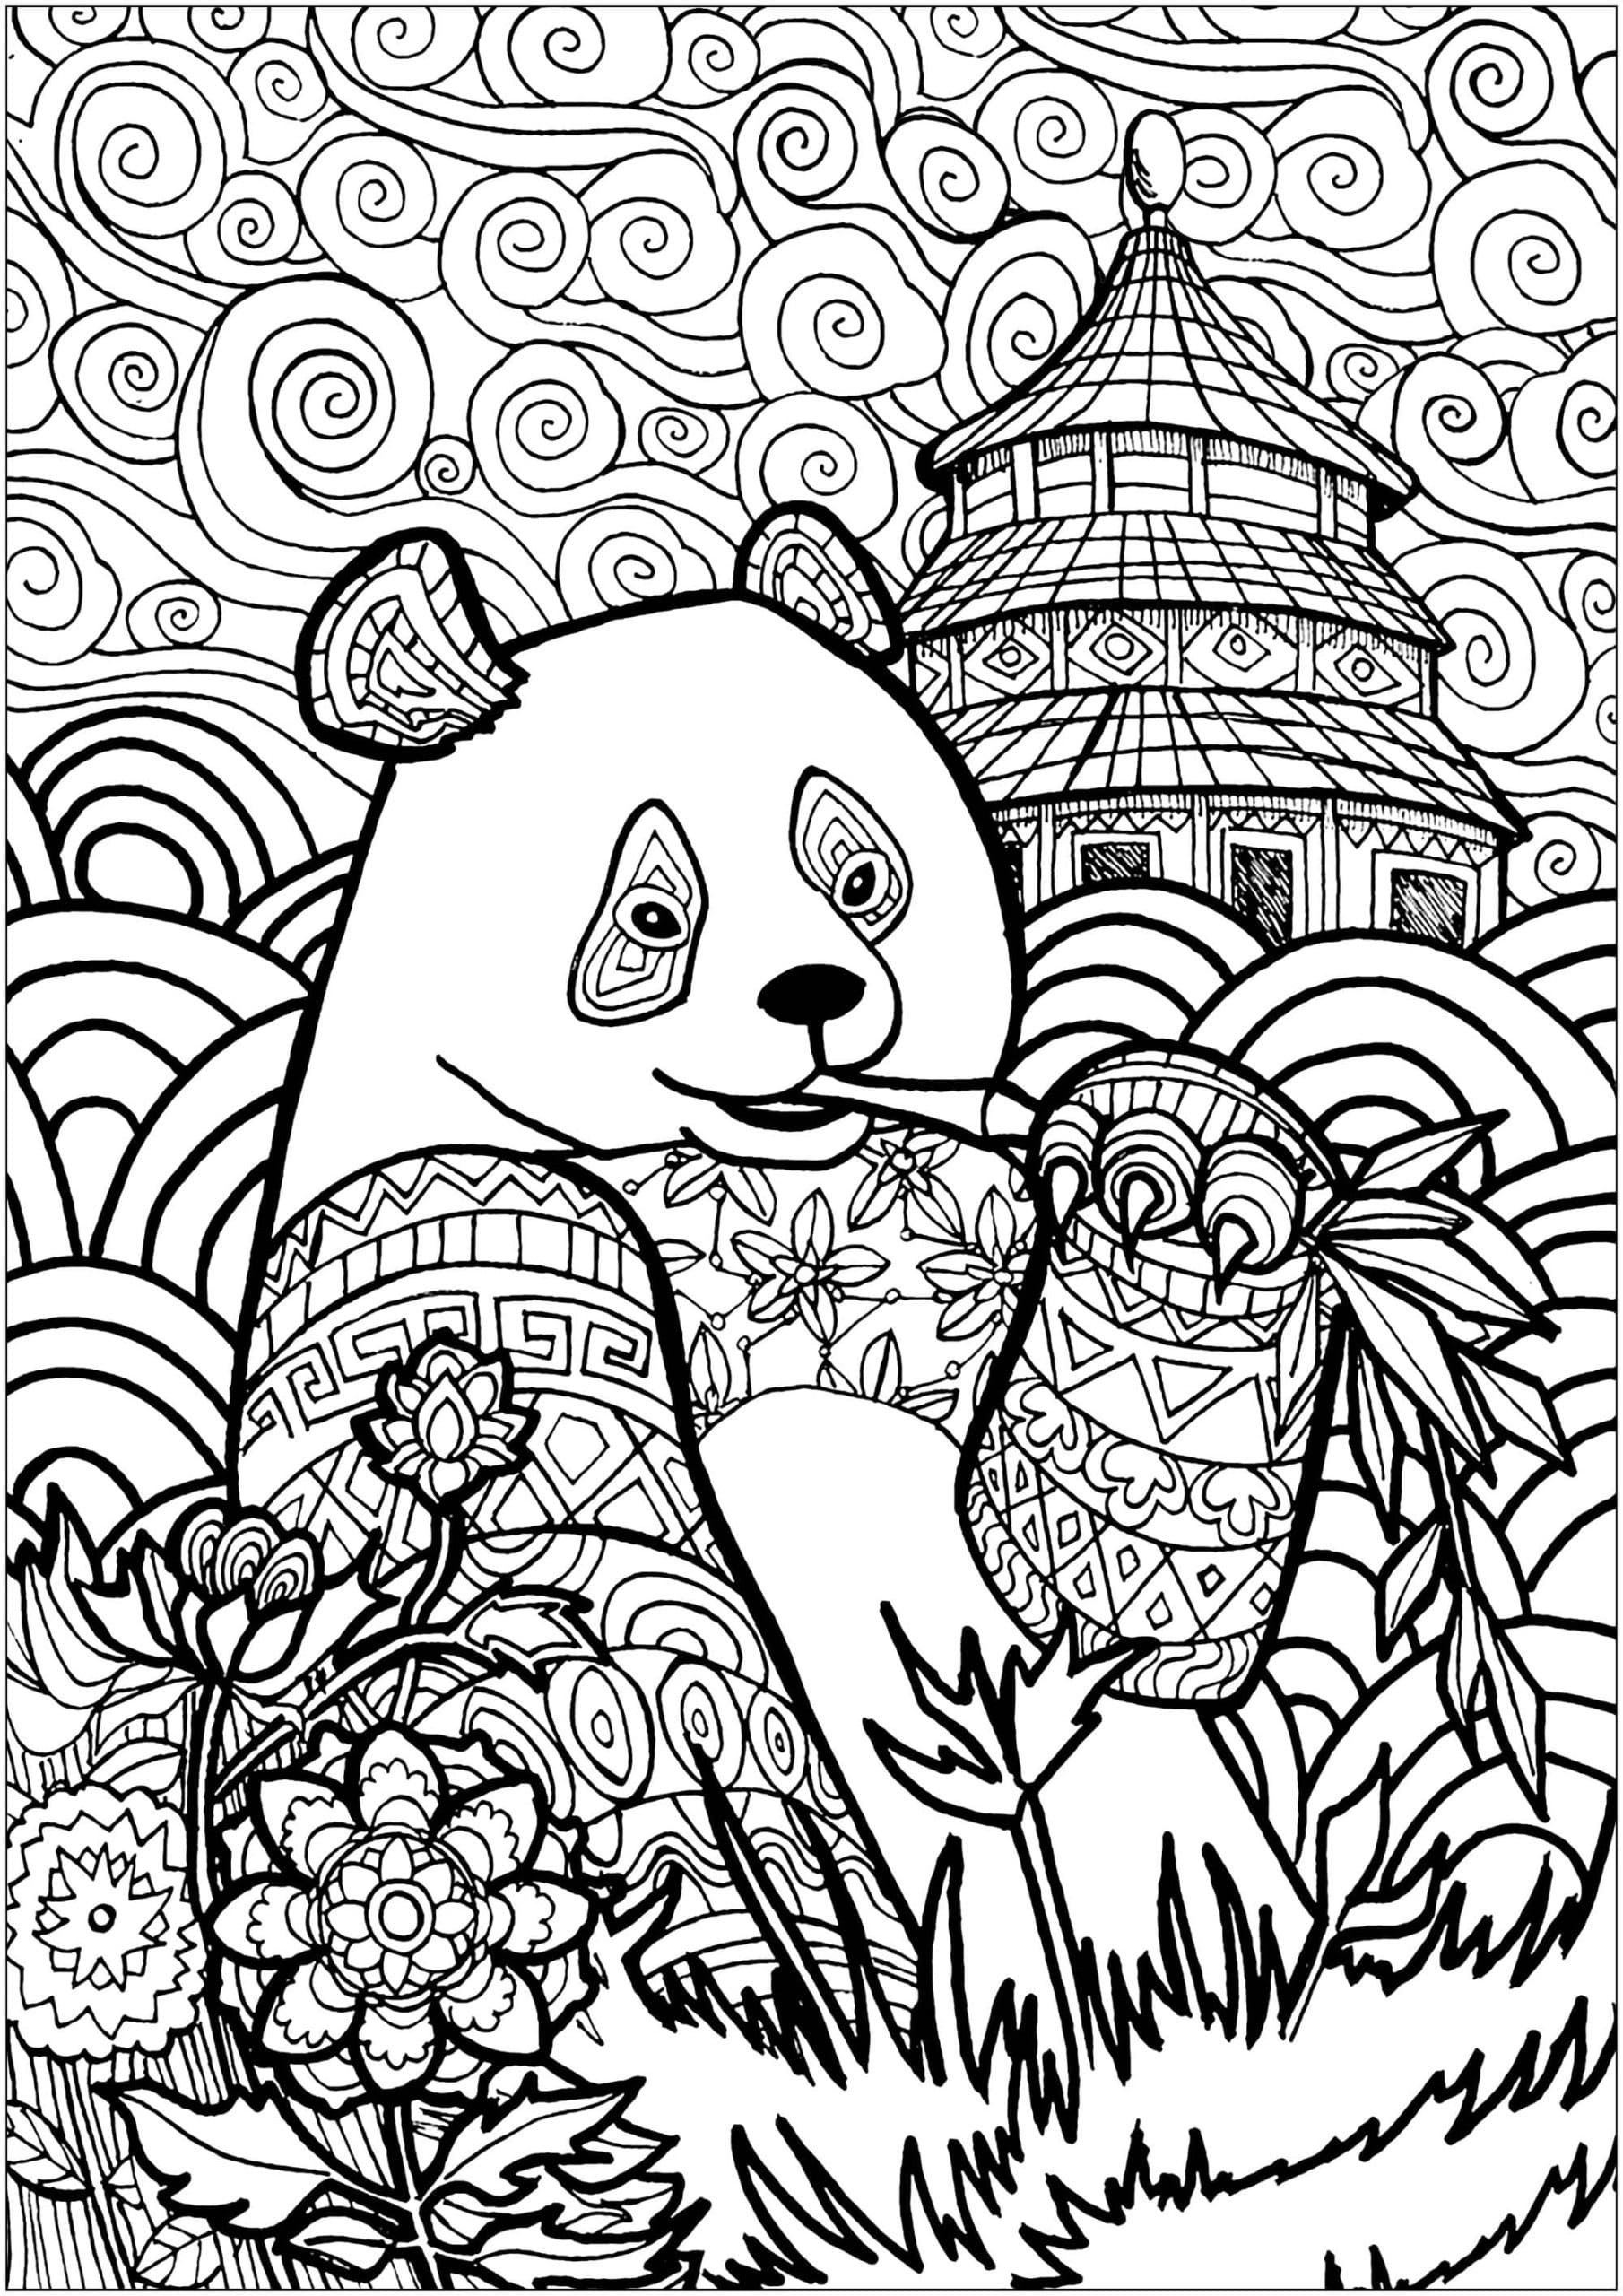 Raskrasil.com-Coloring-Pages-Animal-for-Adults-85